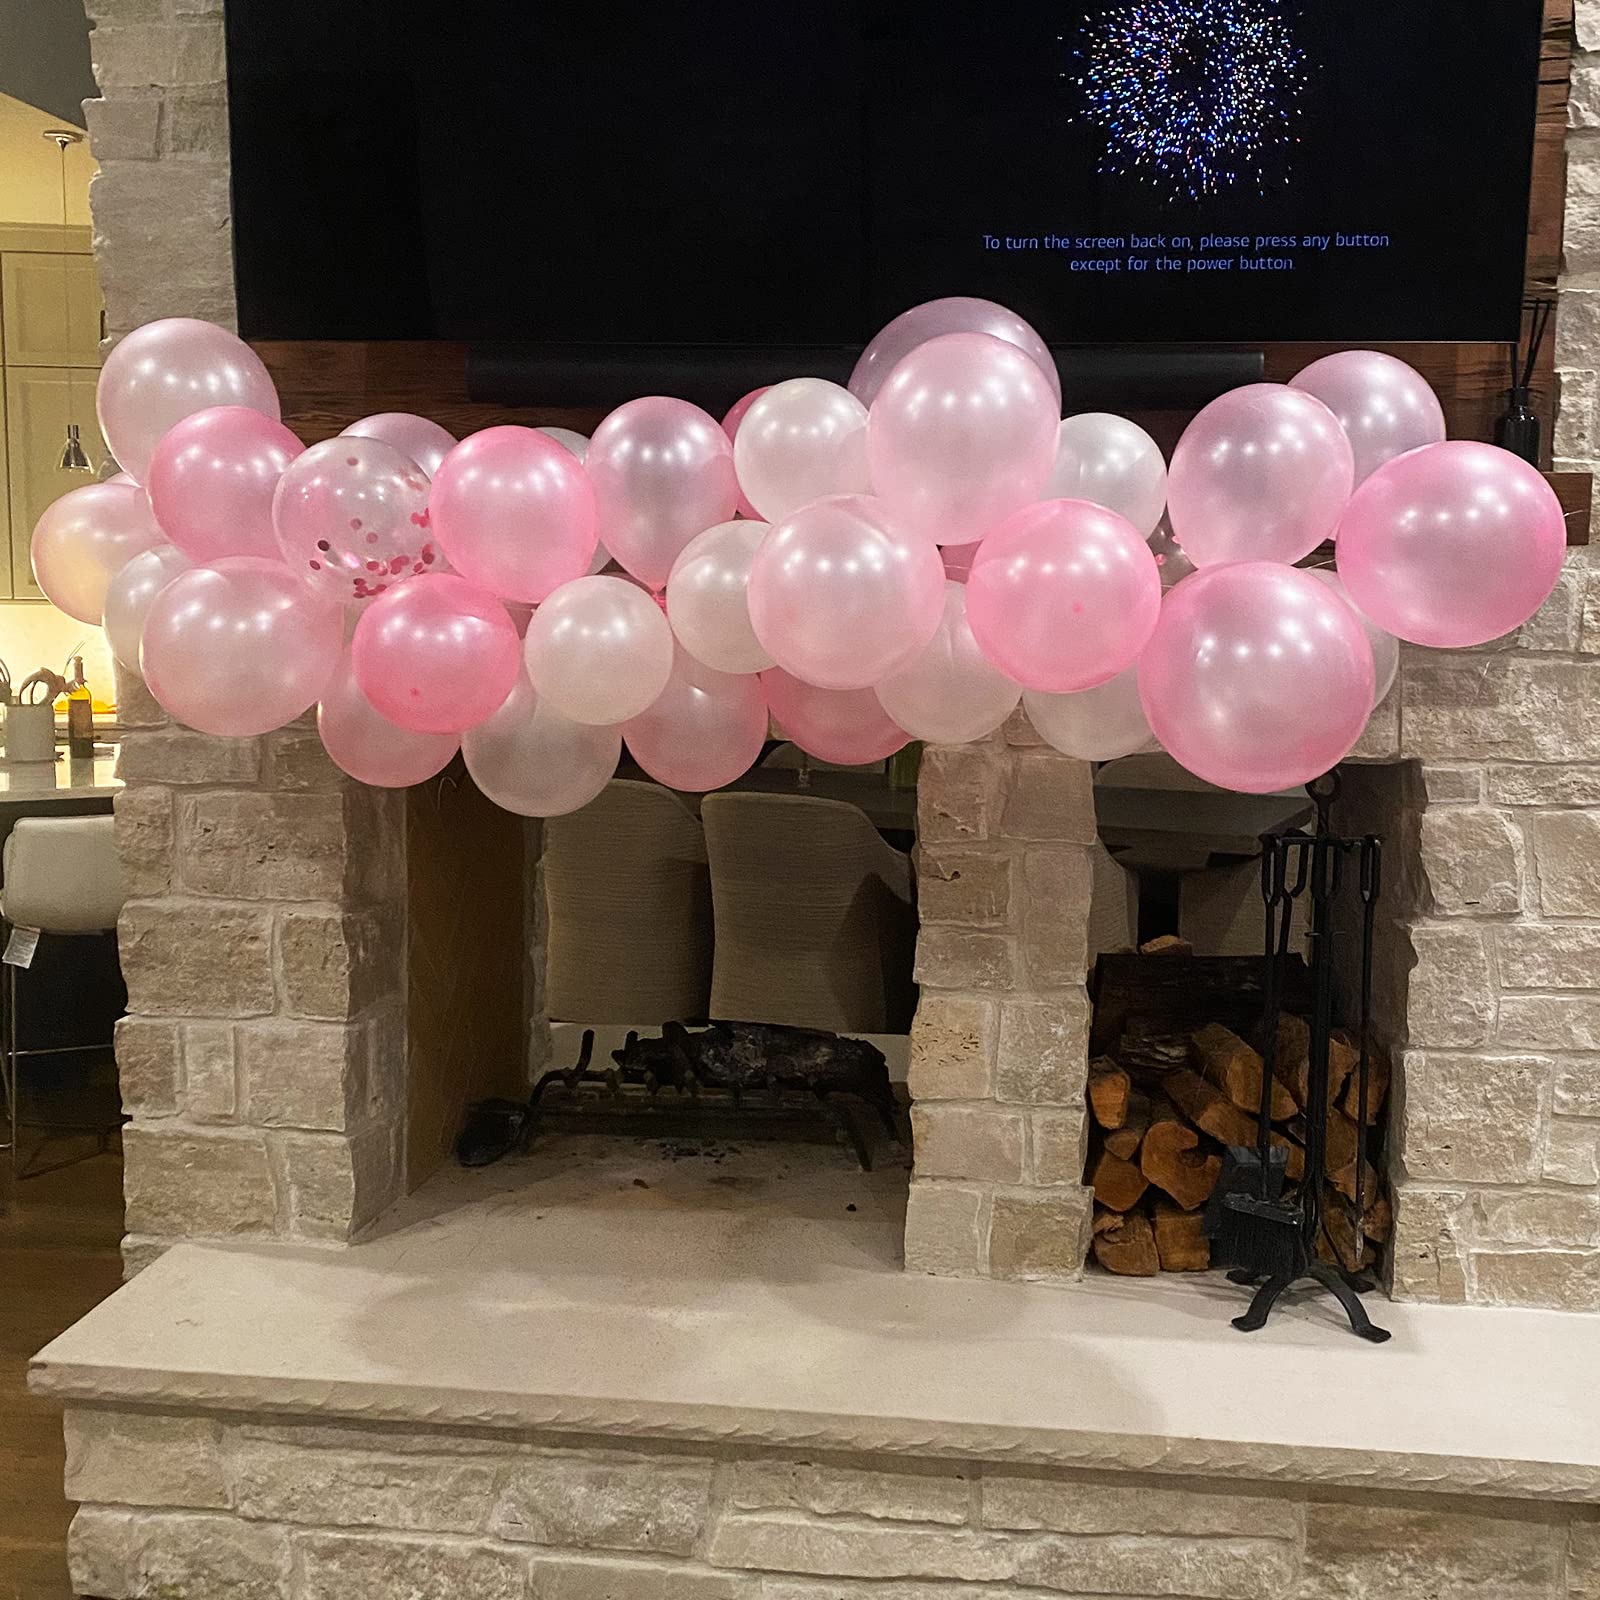 Pink White Balloons, 60 Packs 12 Inch Pink Confetti Balloons White Balloons for Birthday Party Decorations Girl, Weddings, Christening Baby Shower Party, Holiday Festival Party